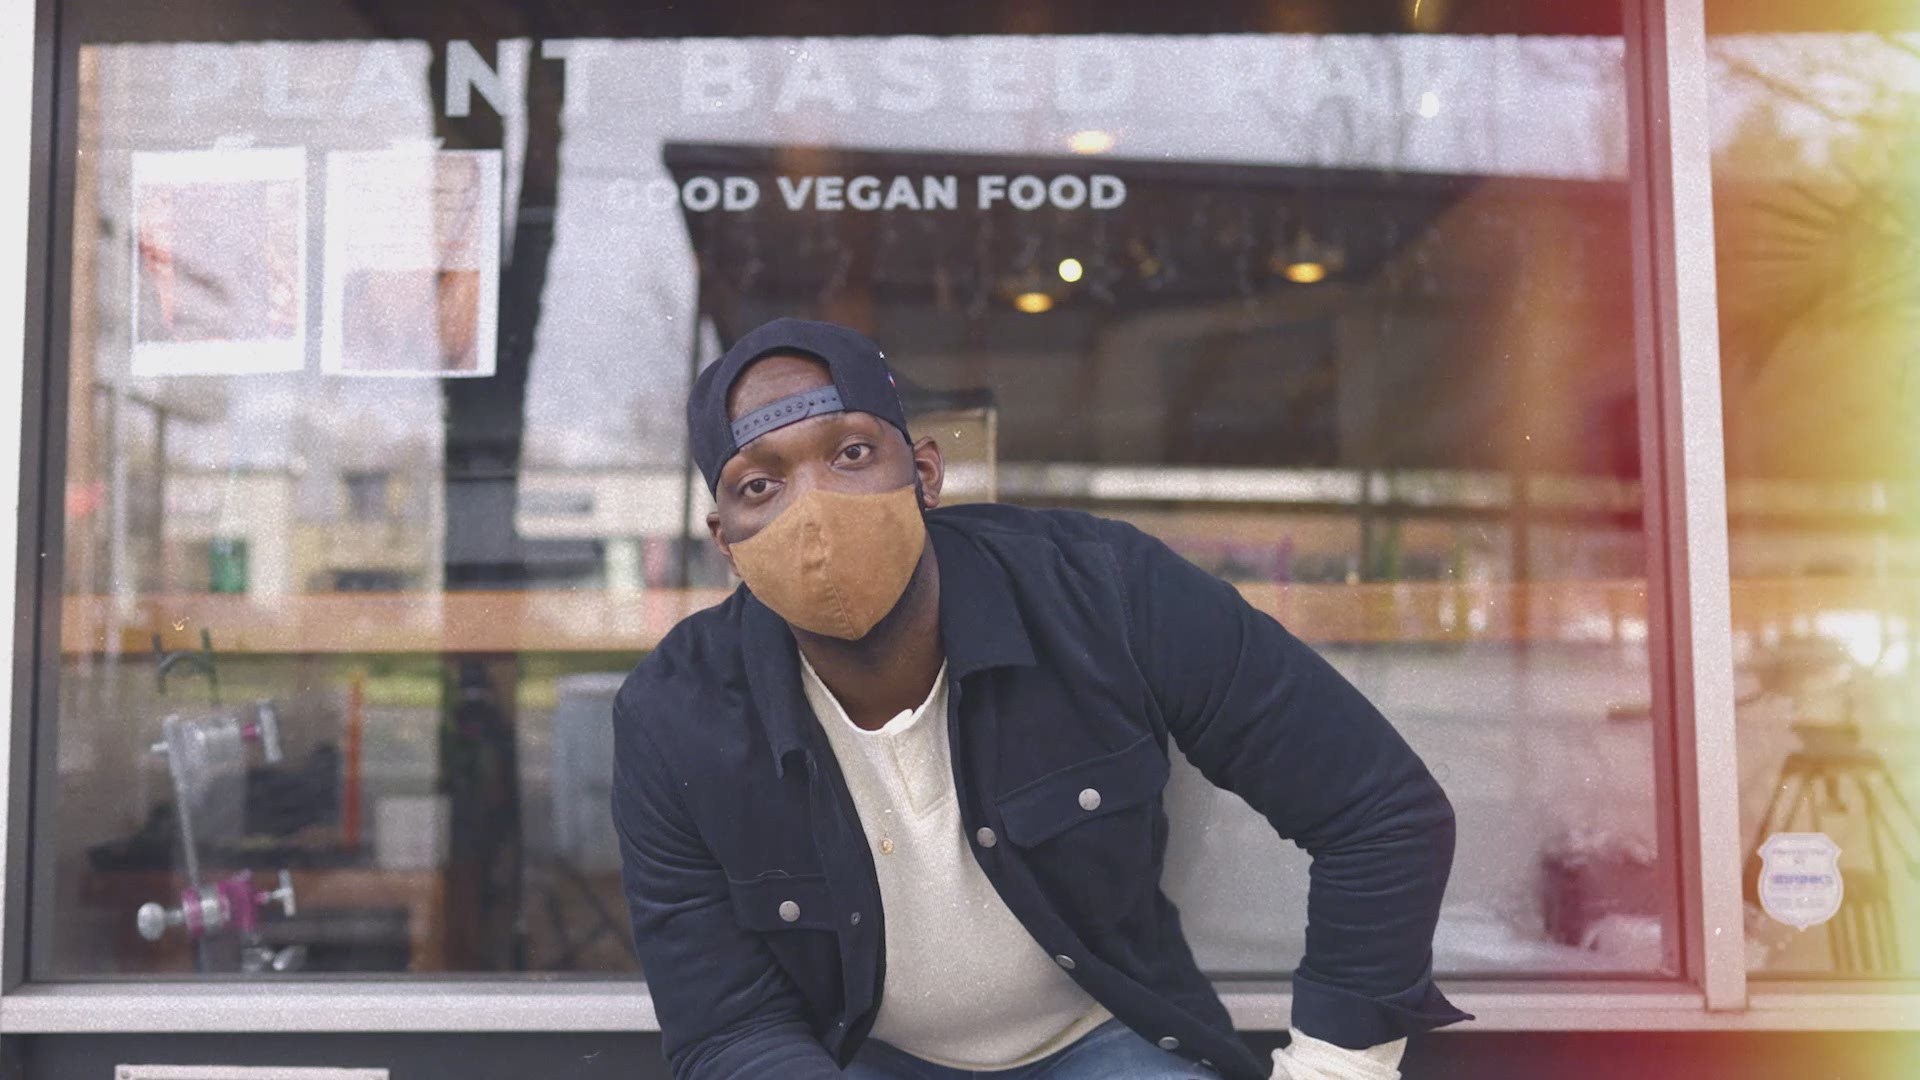 "Plant Based Papi isn’t about food, it’s about ownership and representation. I am on a mission right now in my community, fulfilling purpose with positivity."